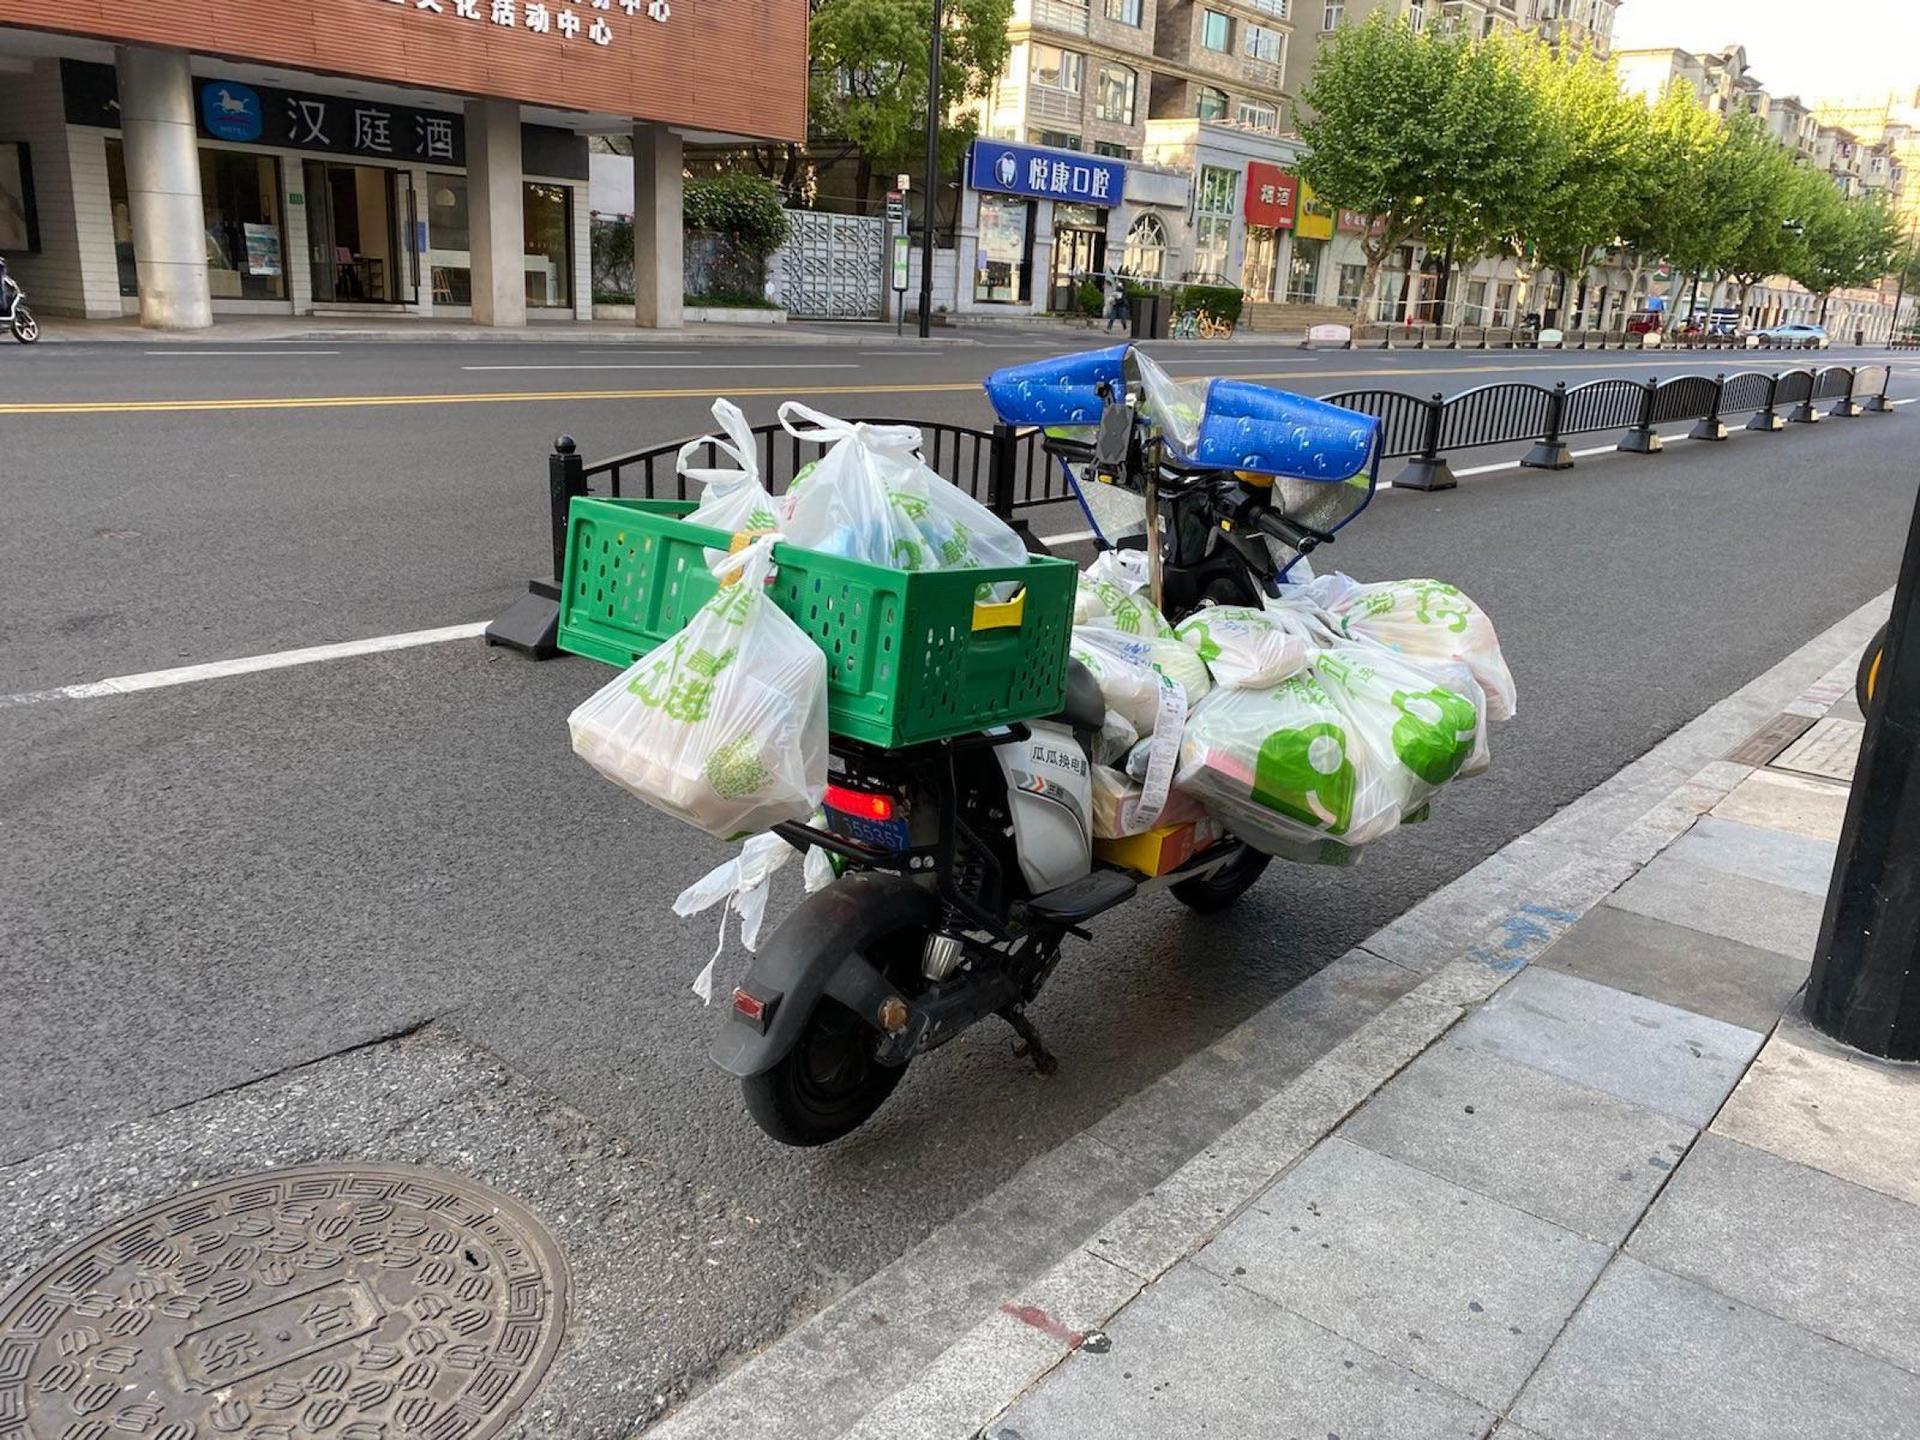 Drivers' bikes get weighed down with plastic bags full of groceries or other essentials. 